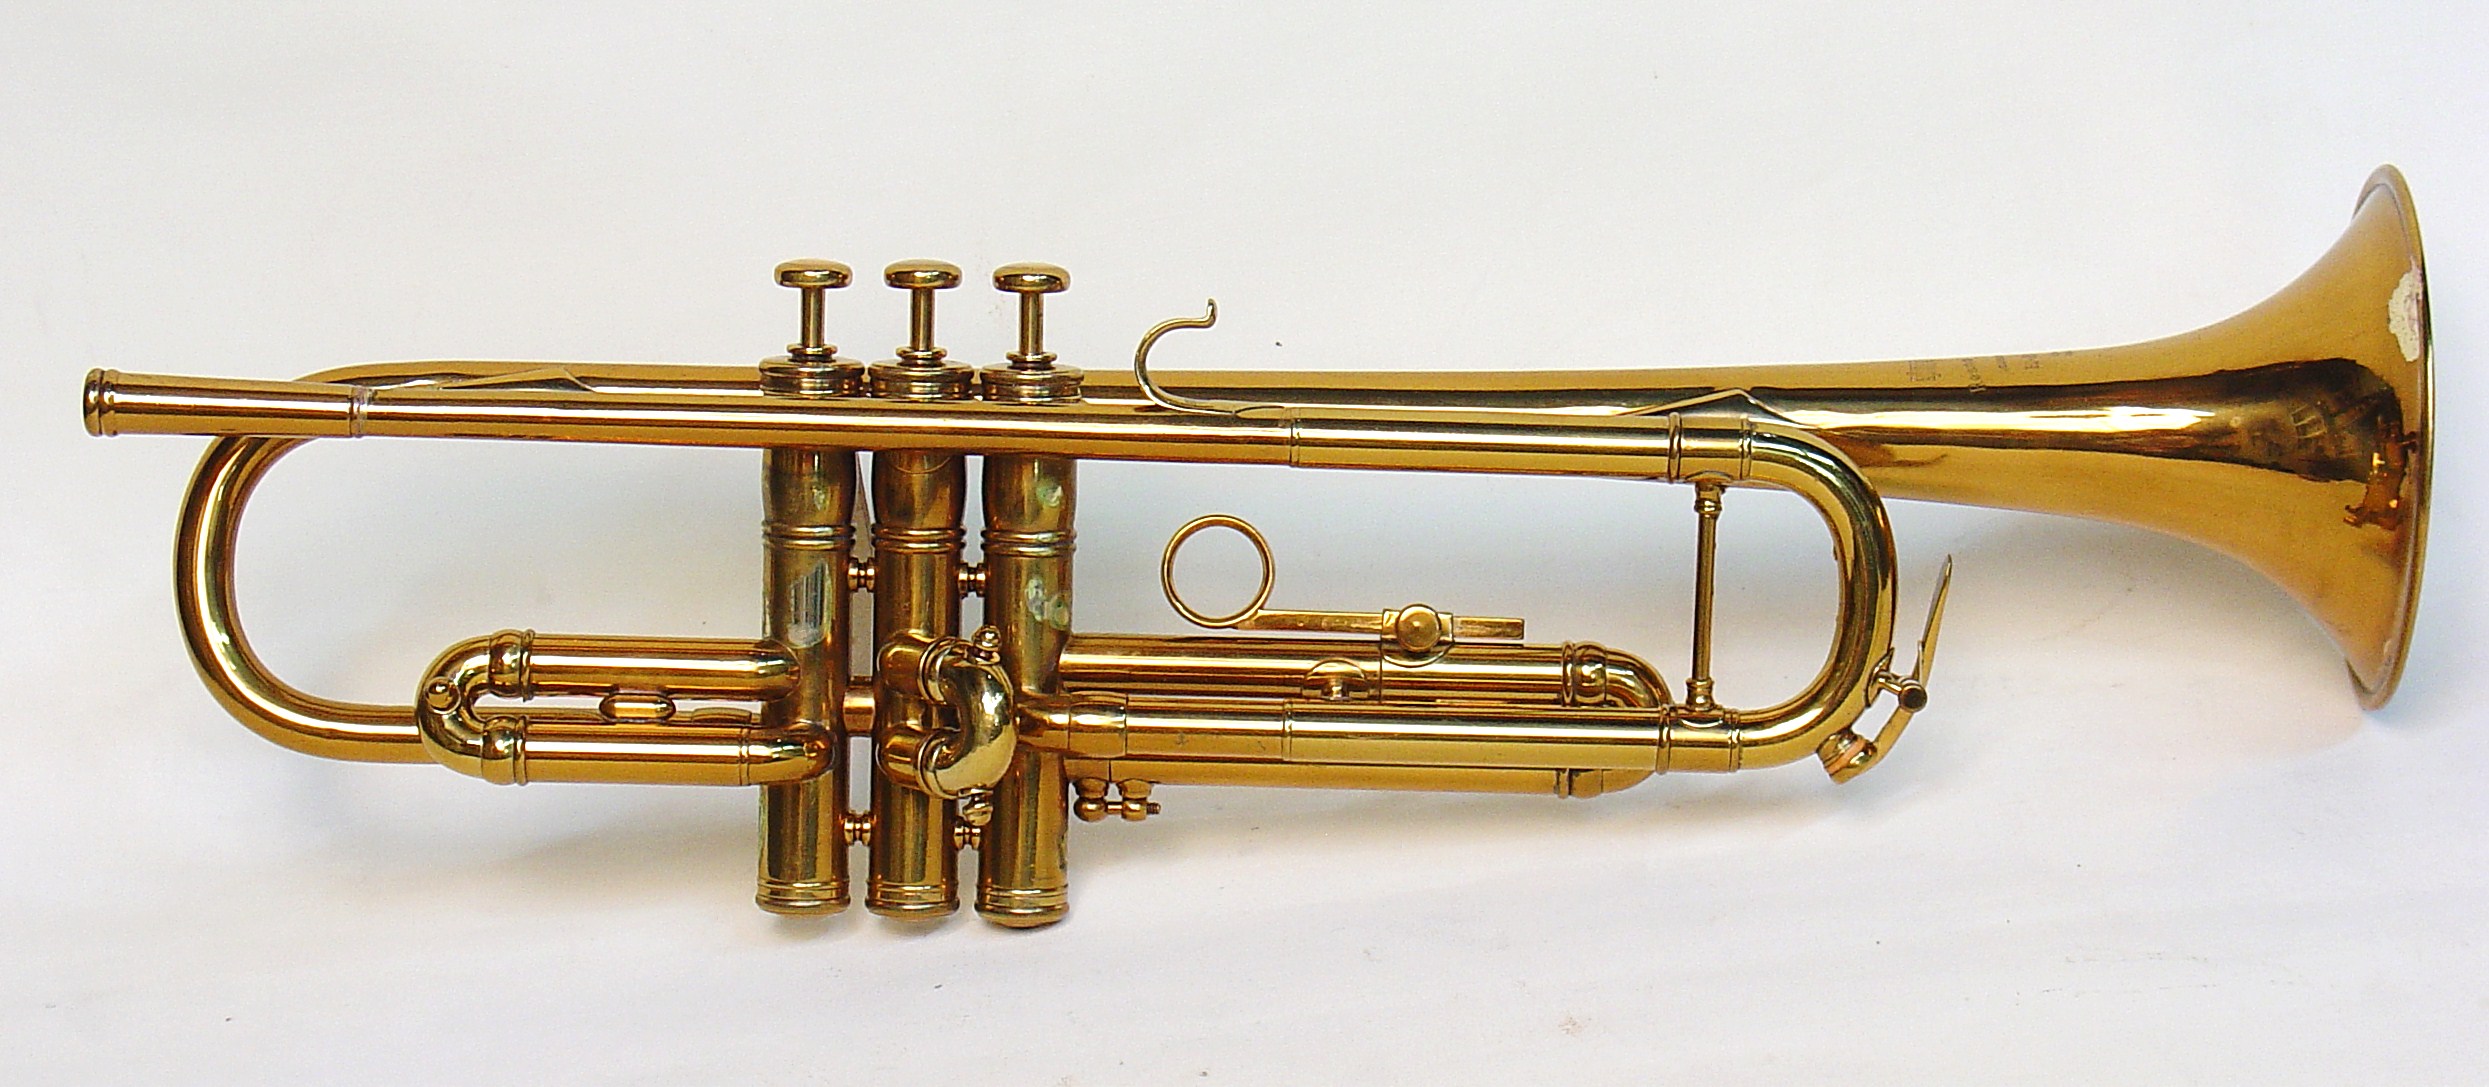 Benge Trumpet, Chicago about 1939